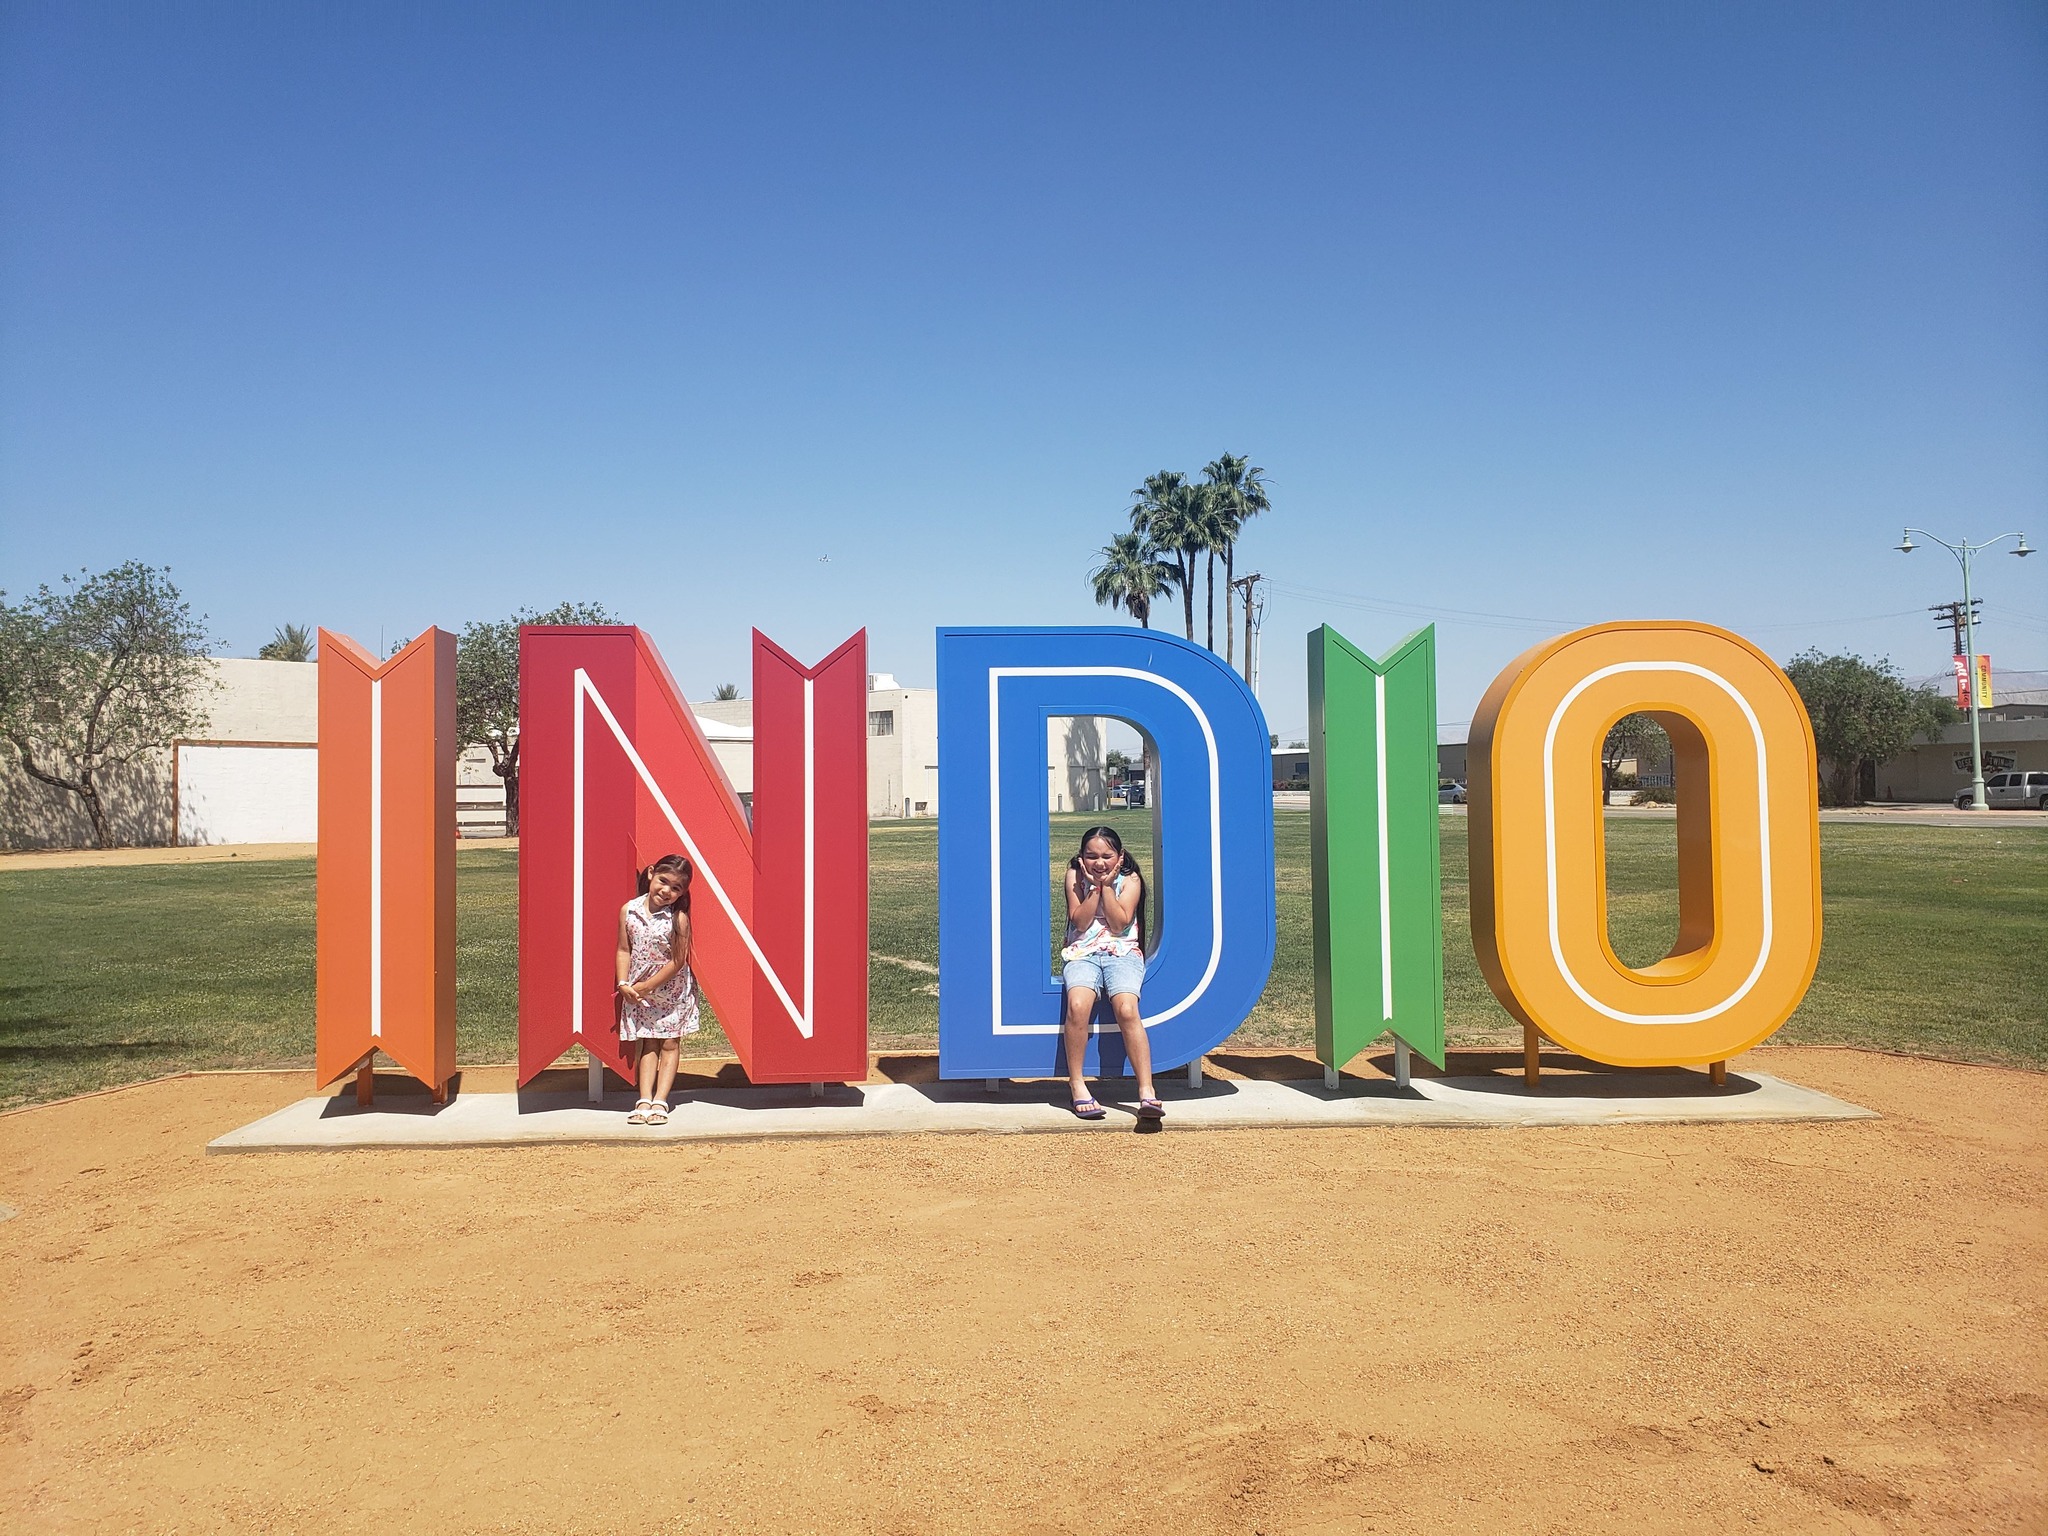 Two young girls pose in front of large outdoor INDIO signage.